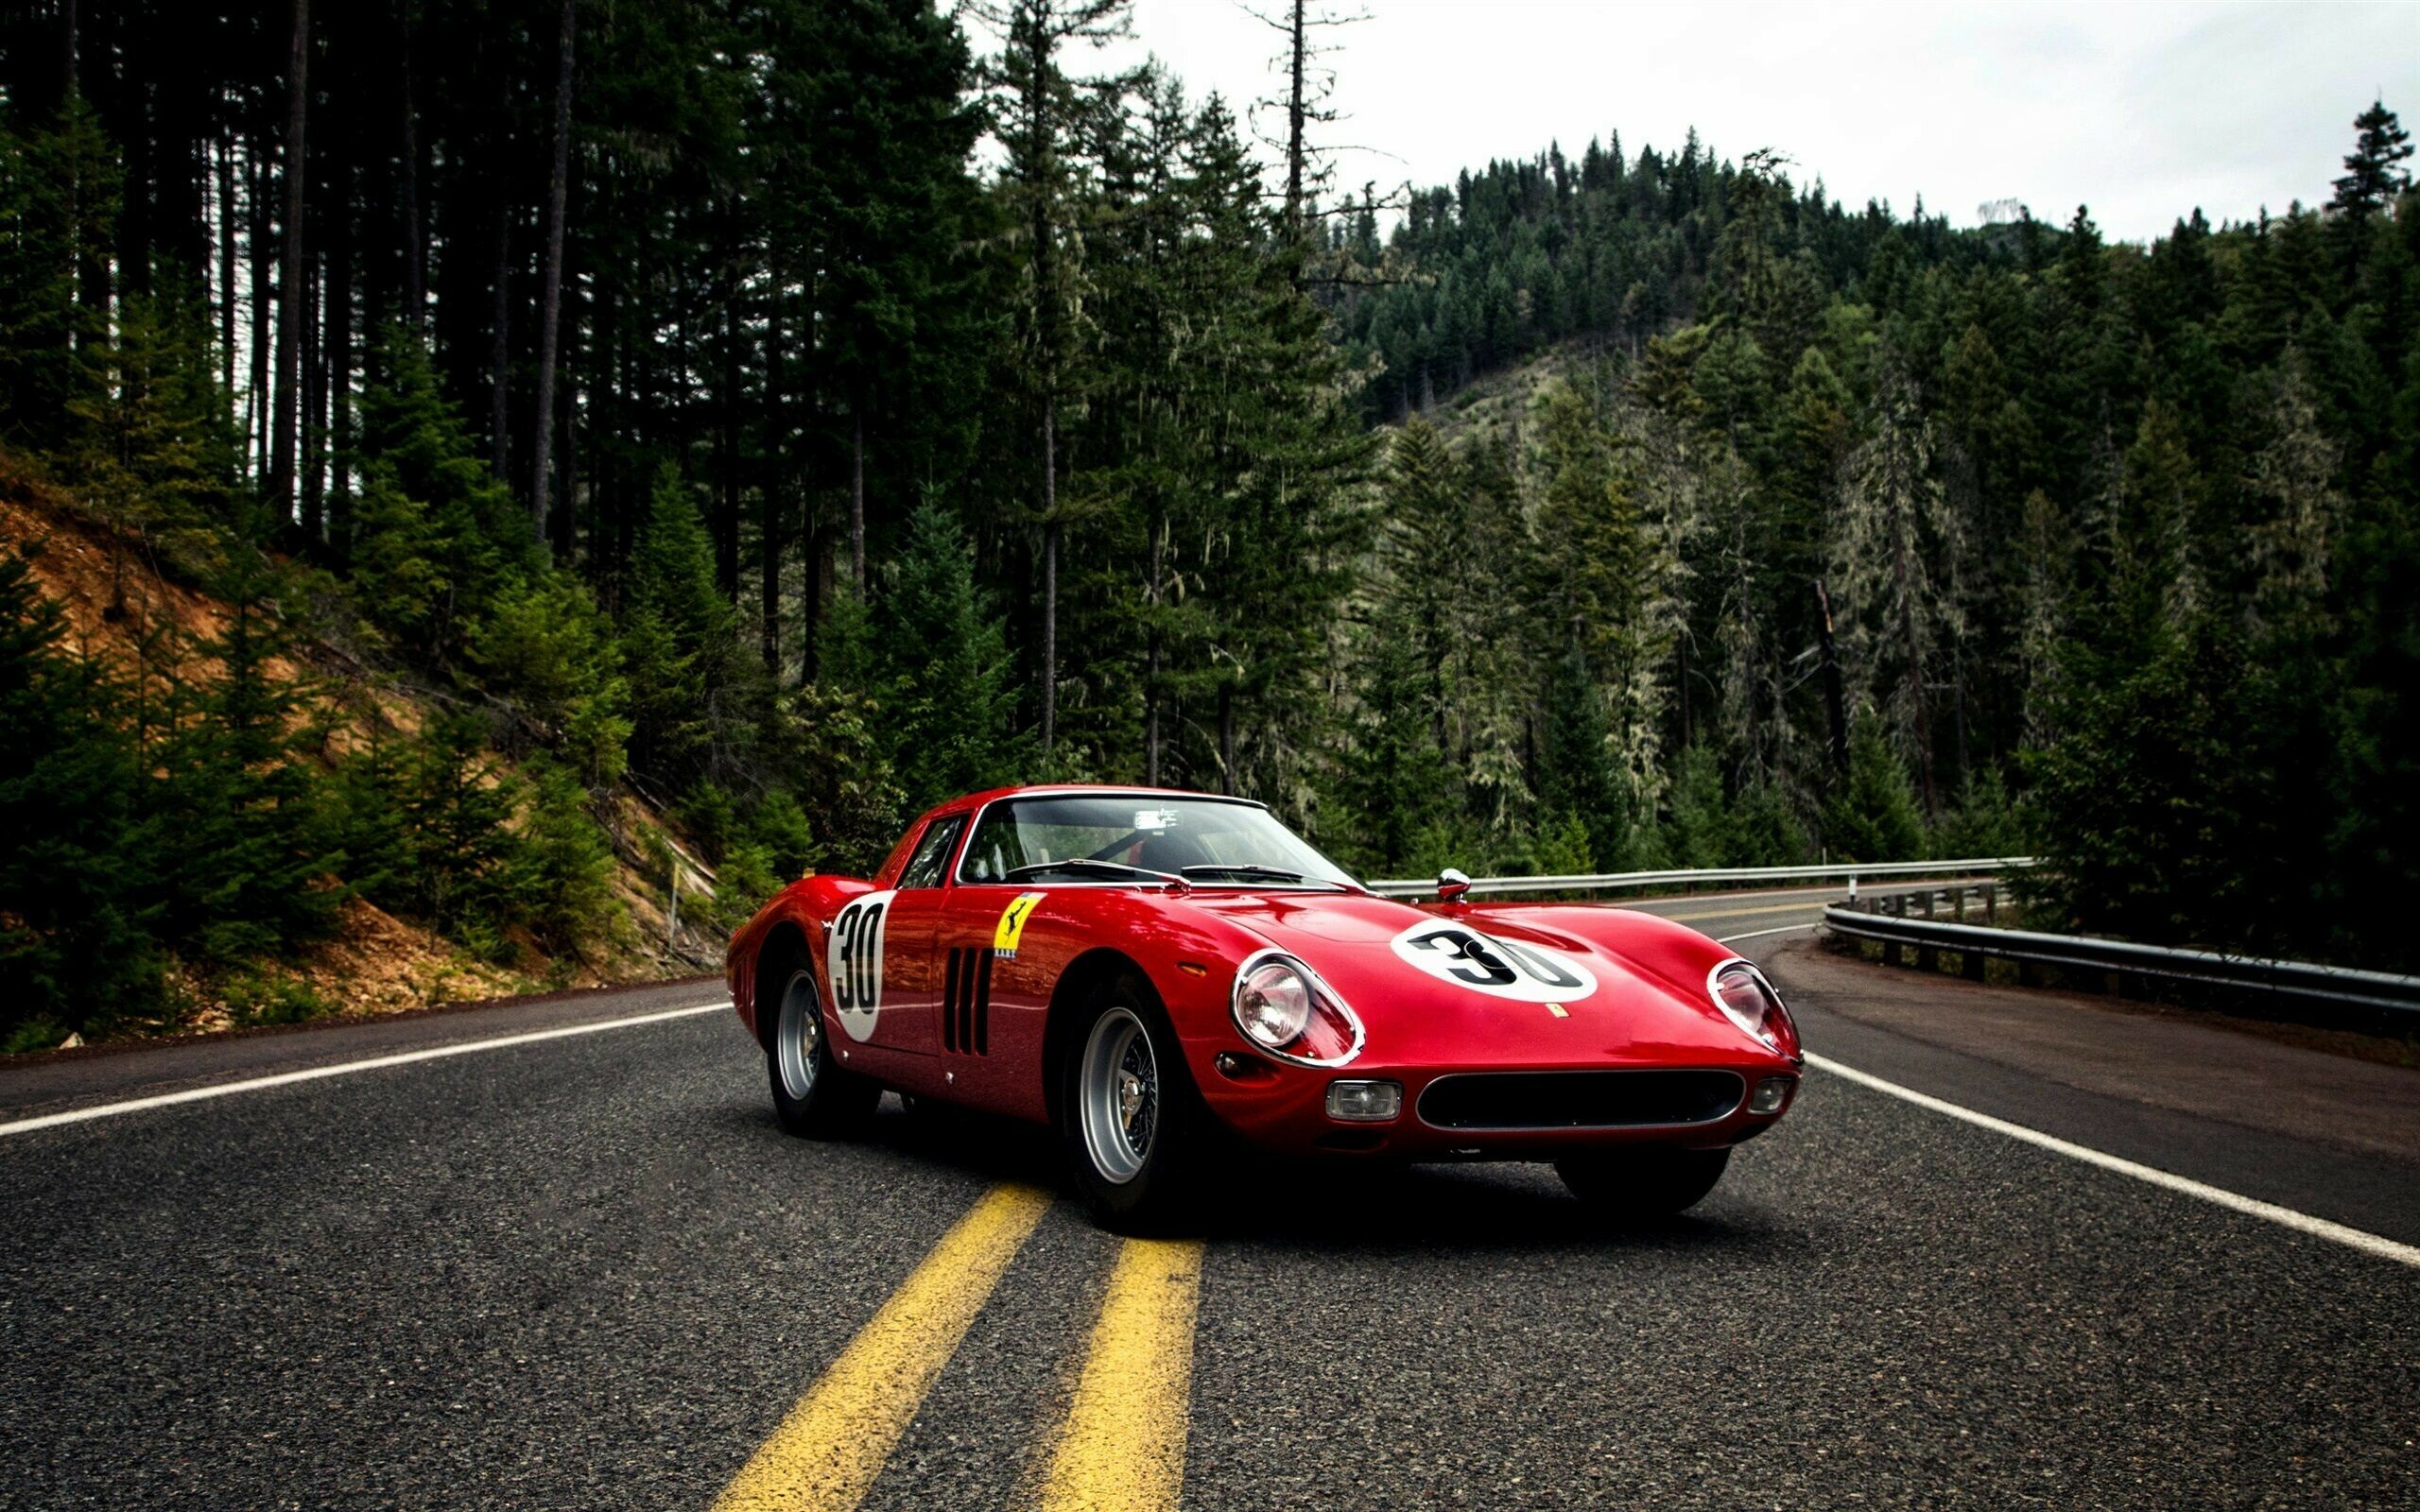 Ferrari: 250 GTO, A GT car produced from 1962 to 1964 for homologation into the FIA's Group 3 Grand Touring Car category. 2560x1600 HD Background.